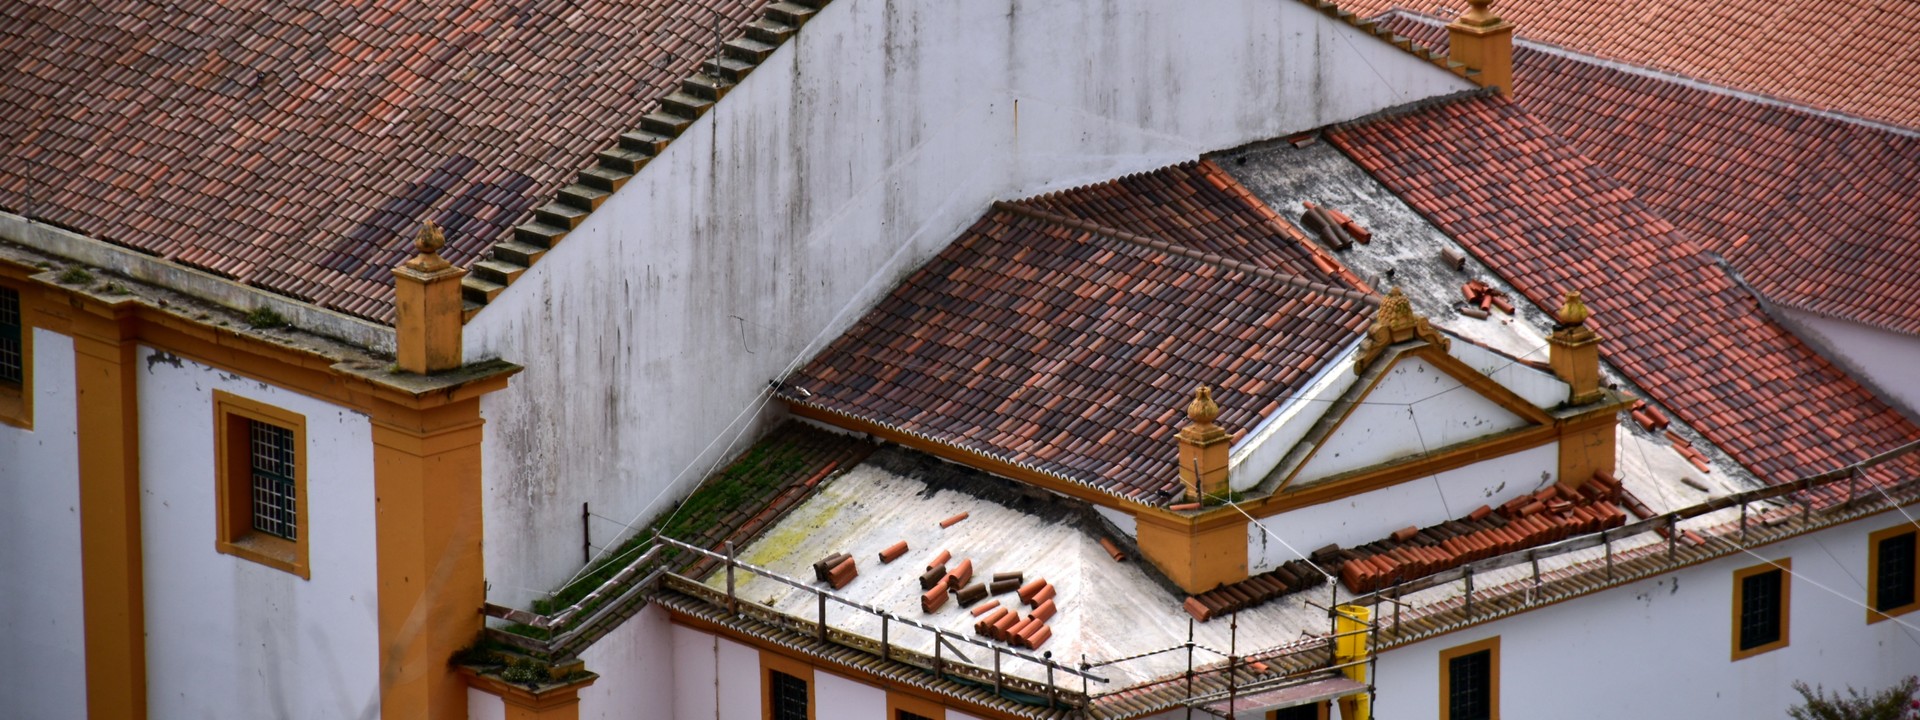 a_view_of_a_building_with_a_lot_of_roof_tiles - ©ries_bosch